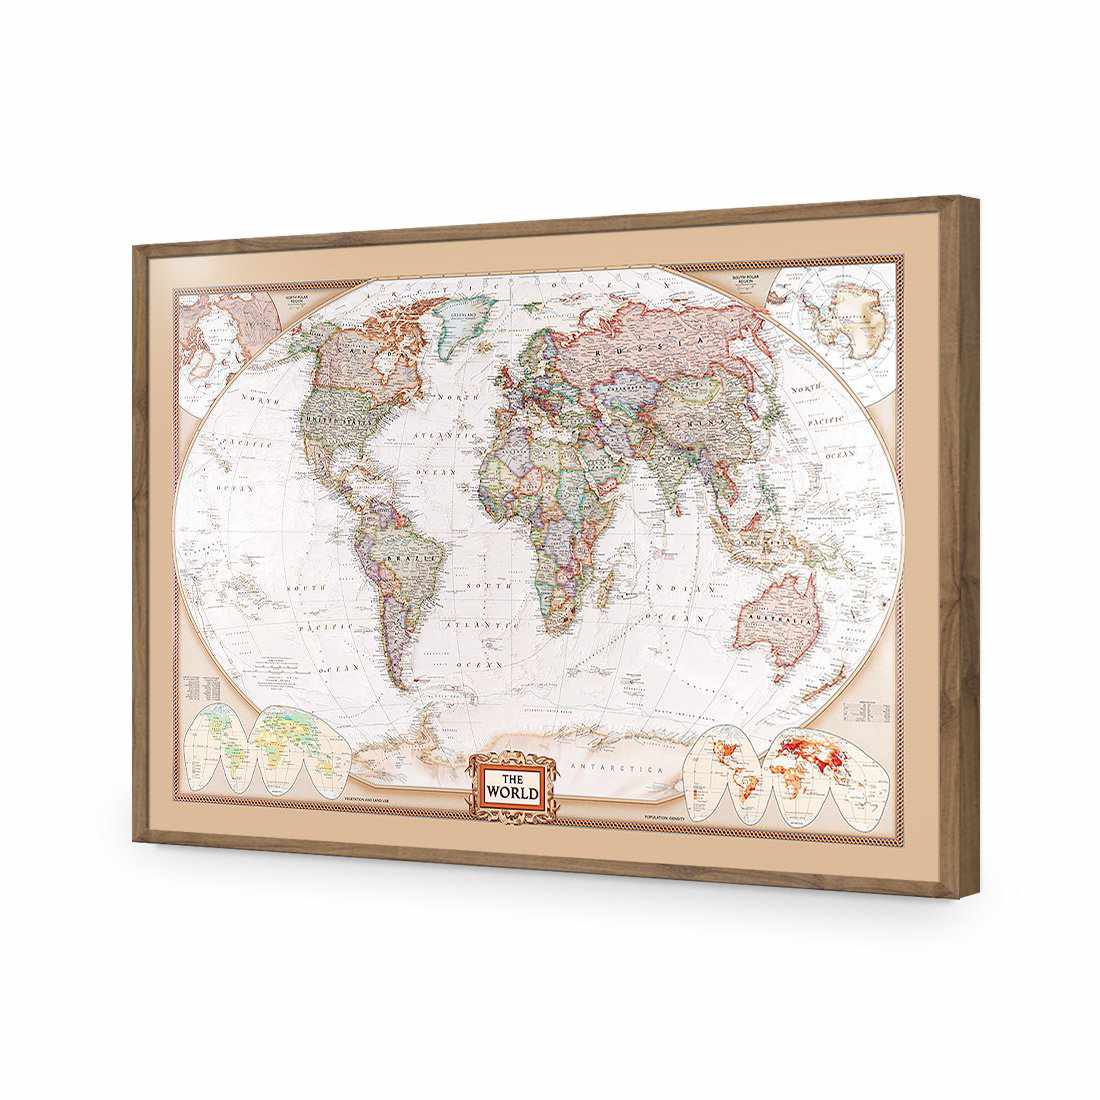 The World Map-Acrylic-Wall Art Design-Without Border-Acrylic - Natural Frame-45x30cm-Wall Art Designs